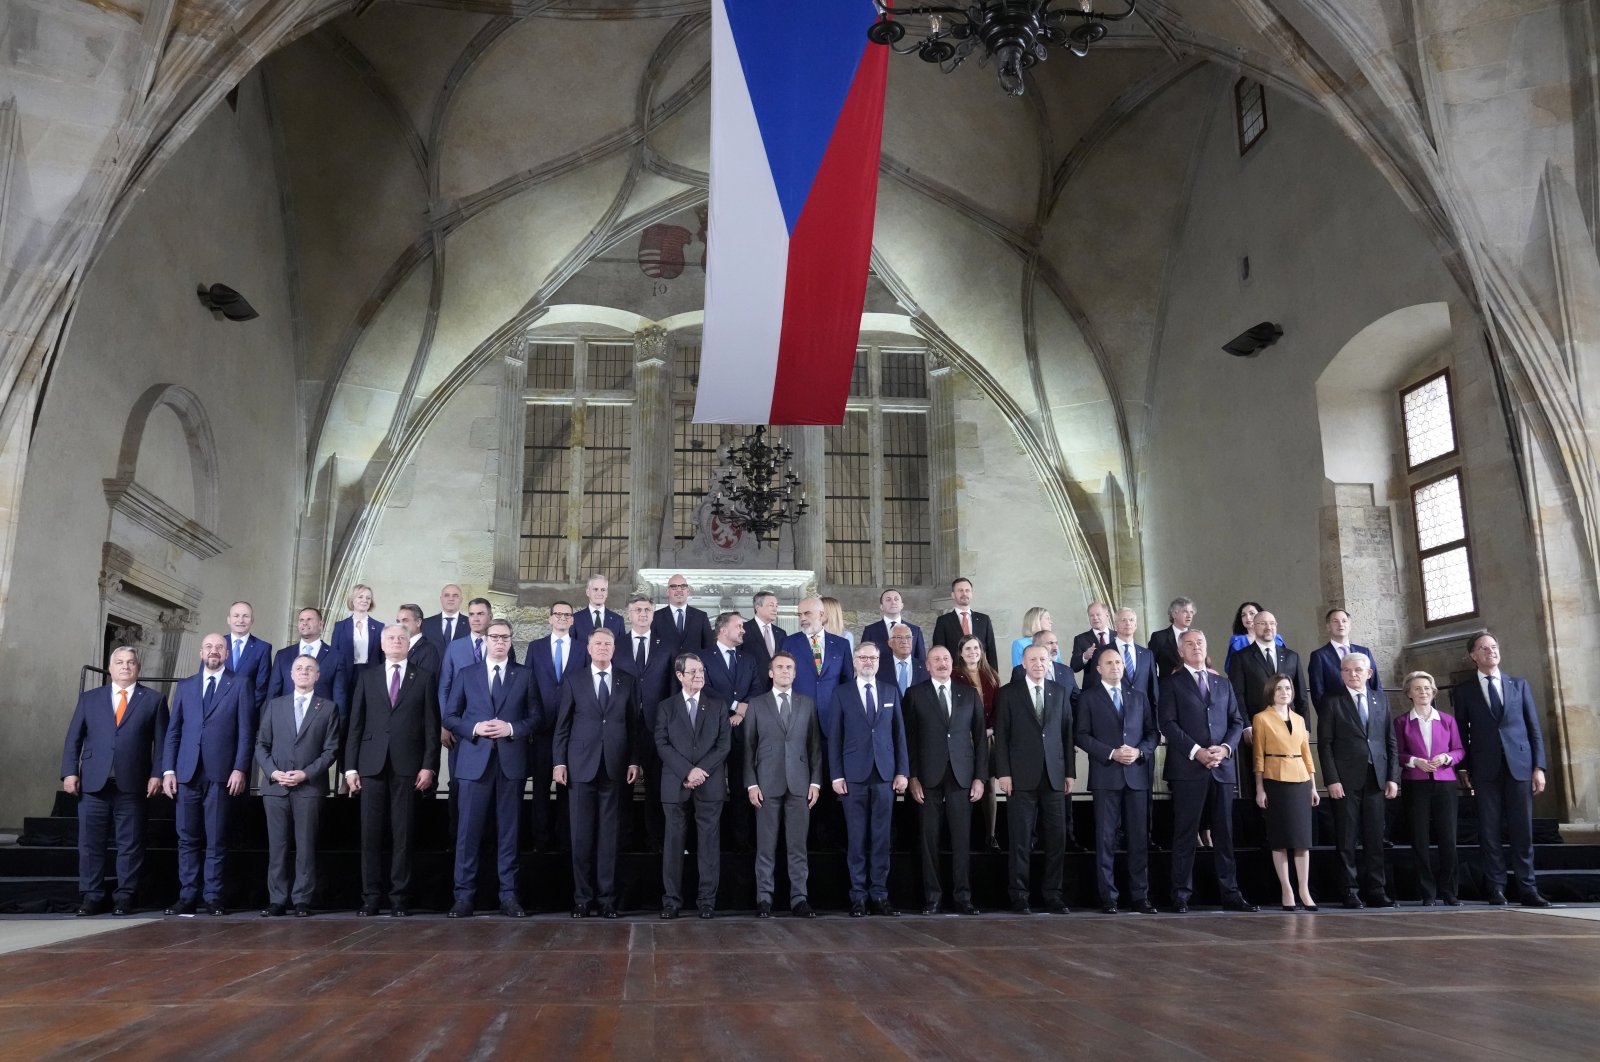 Leaders pose for a group photo during a meeting of the European Political Community at Prague Castle in Prague, Czech Republic, Thursday, Oct 6, 2022. (AP Photo)